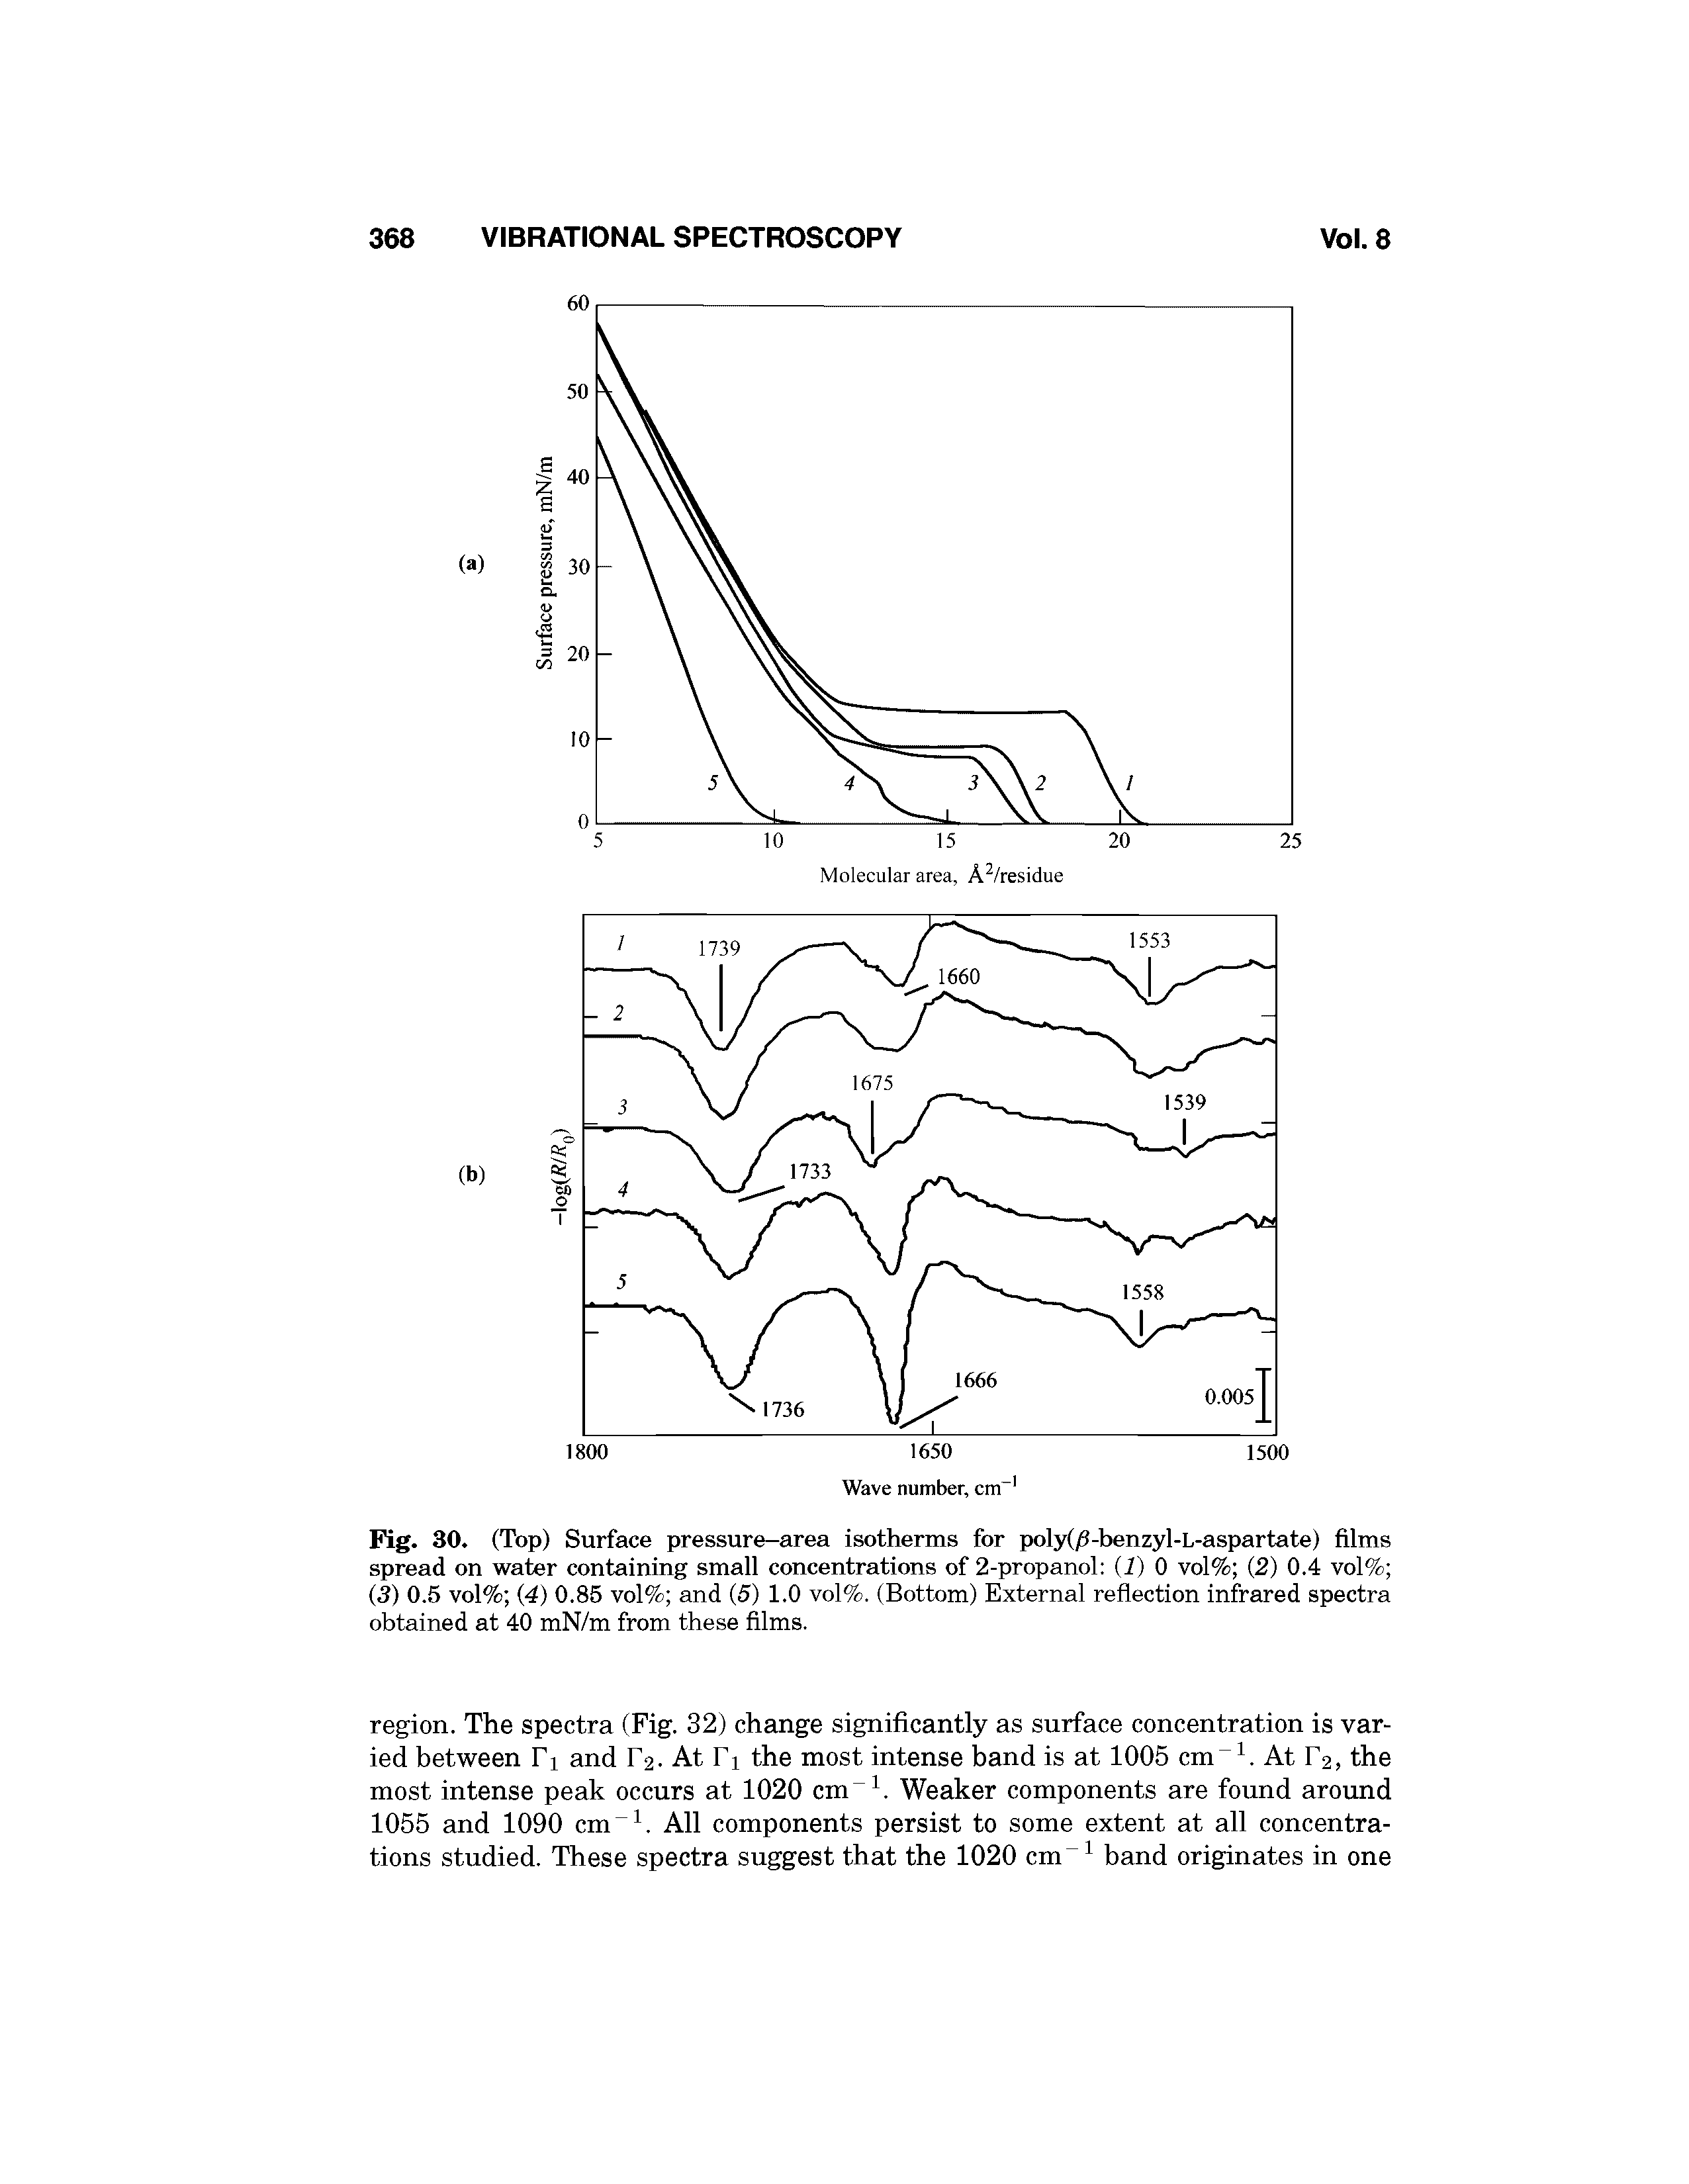 Fig. 30. (Top) Surface pressure-area isotherms for poly(/6-benzyl-L-aspartate) films spread on water containing small concentrations of 2-propanol (1) 0 vol% (2) 0.4 vol% (3) 0.5 vol% (4) 0.85 vol% and (5) 1.0 vol%. (Bottom) External reflection infrared spectra obtained at 40 mN/m from these films.